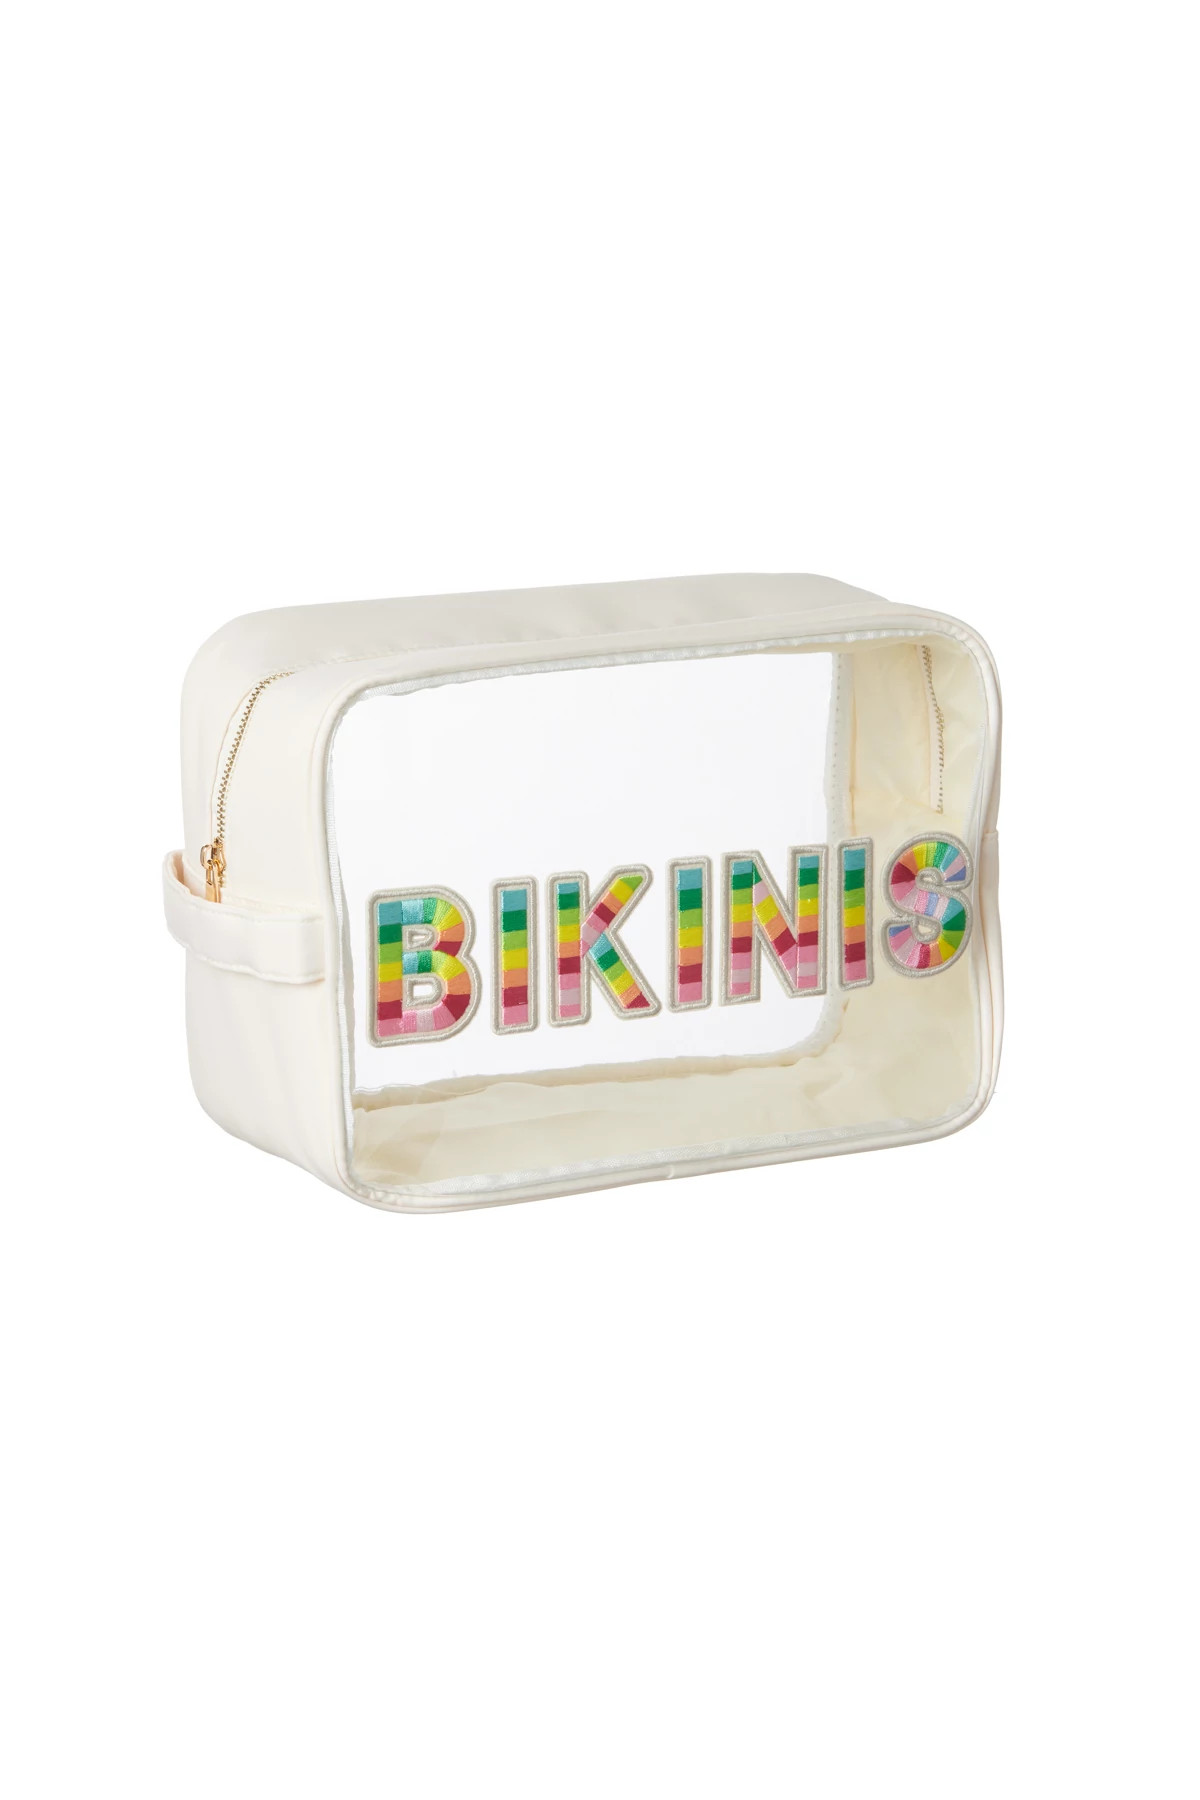 CLEAR Bikinis Zip Pouch image number 1